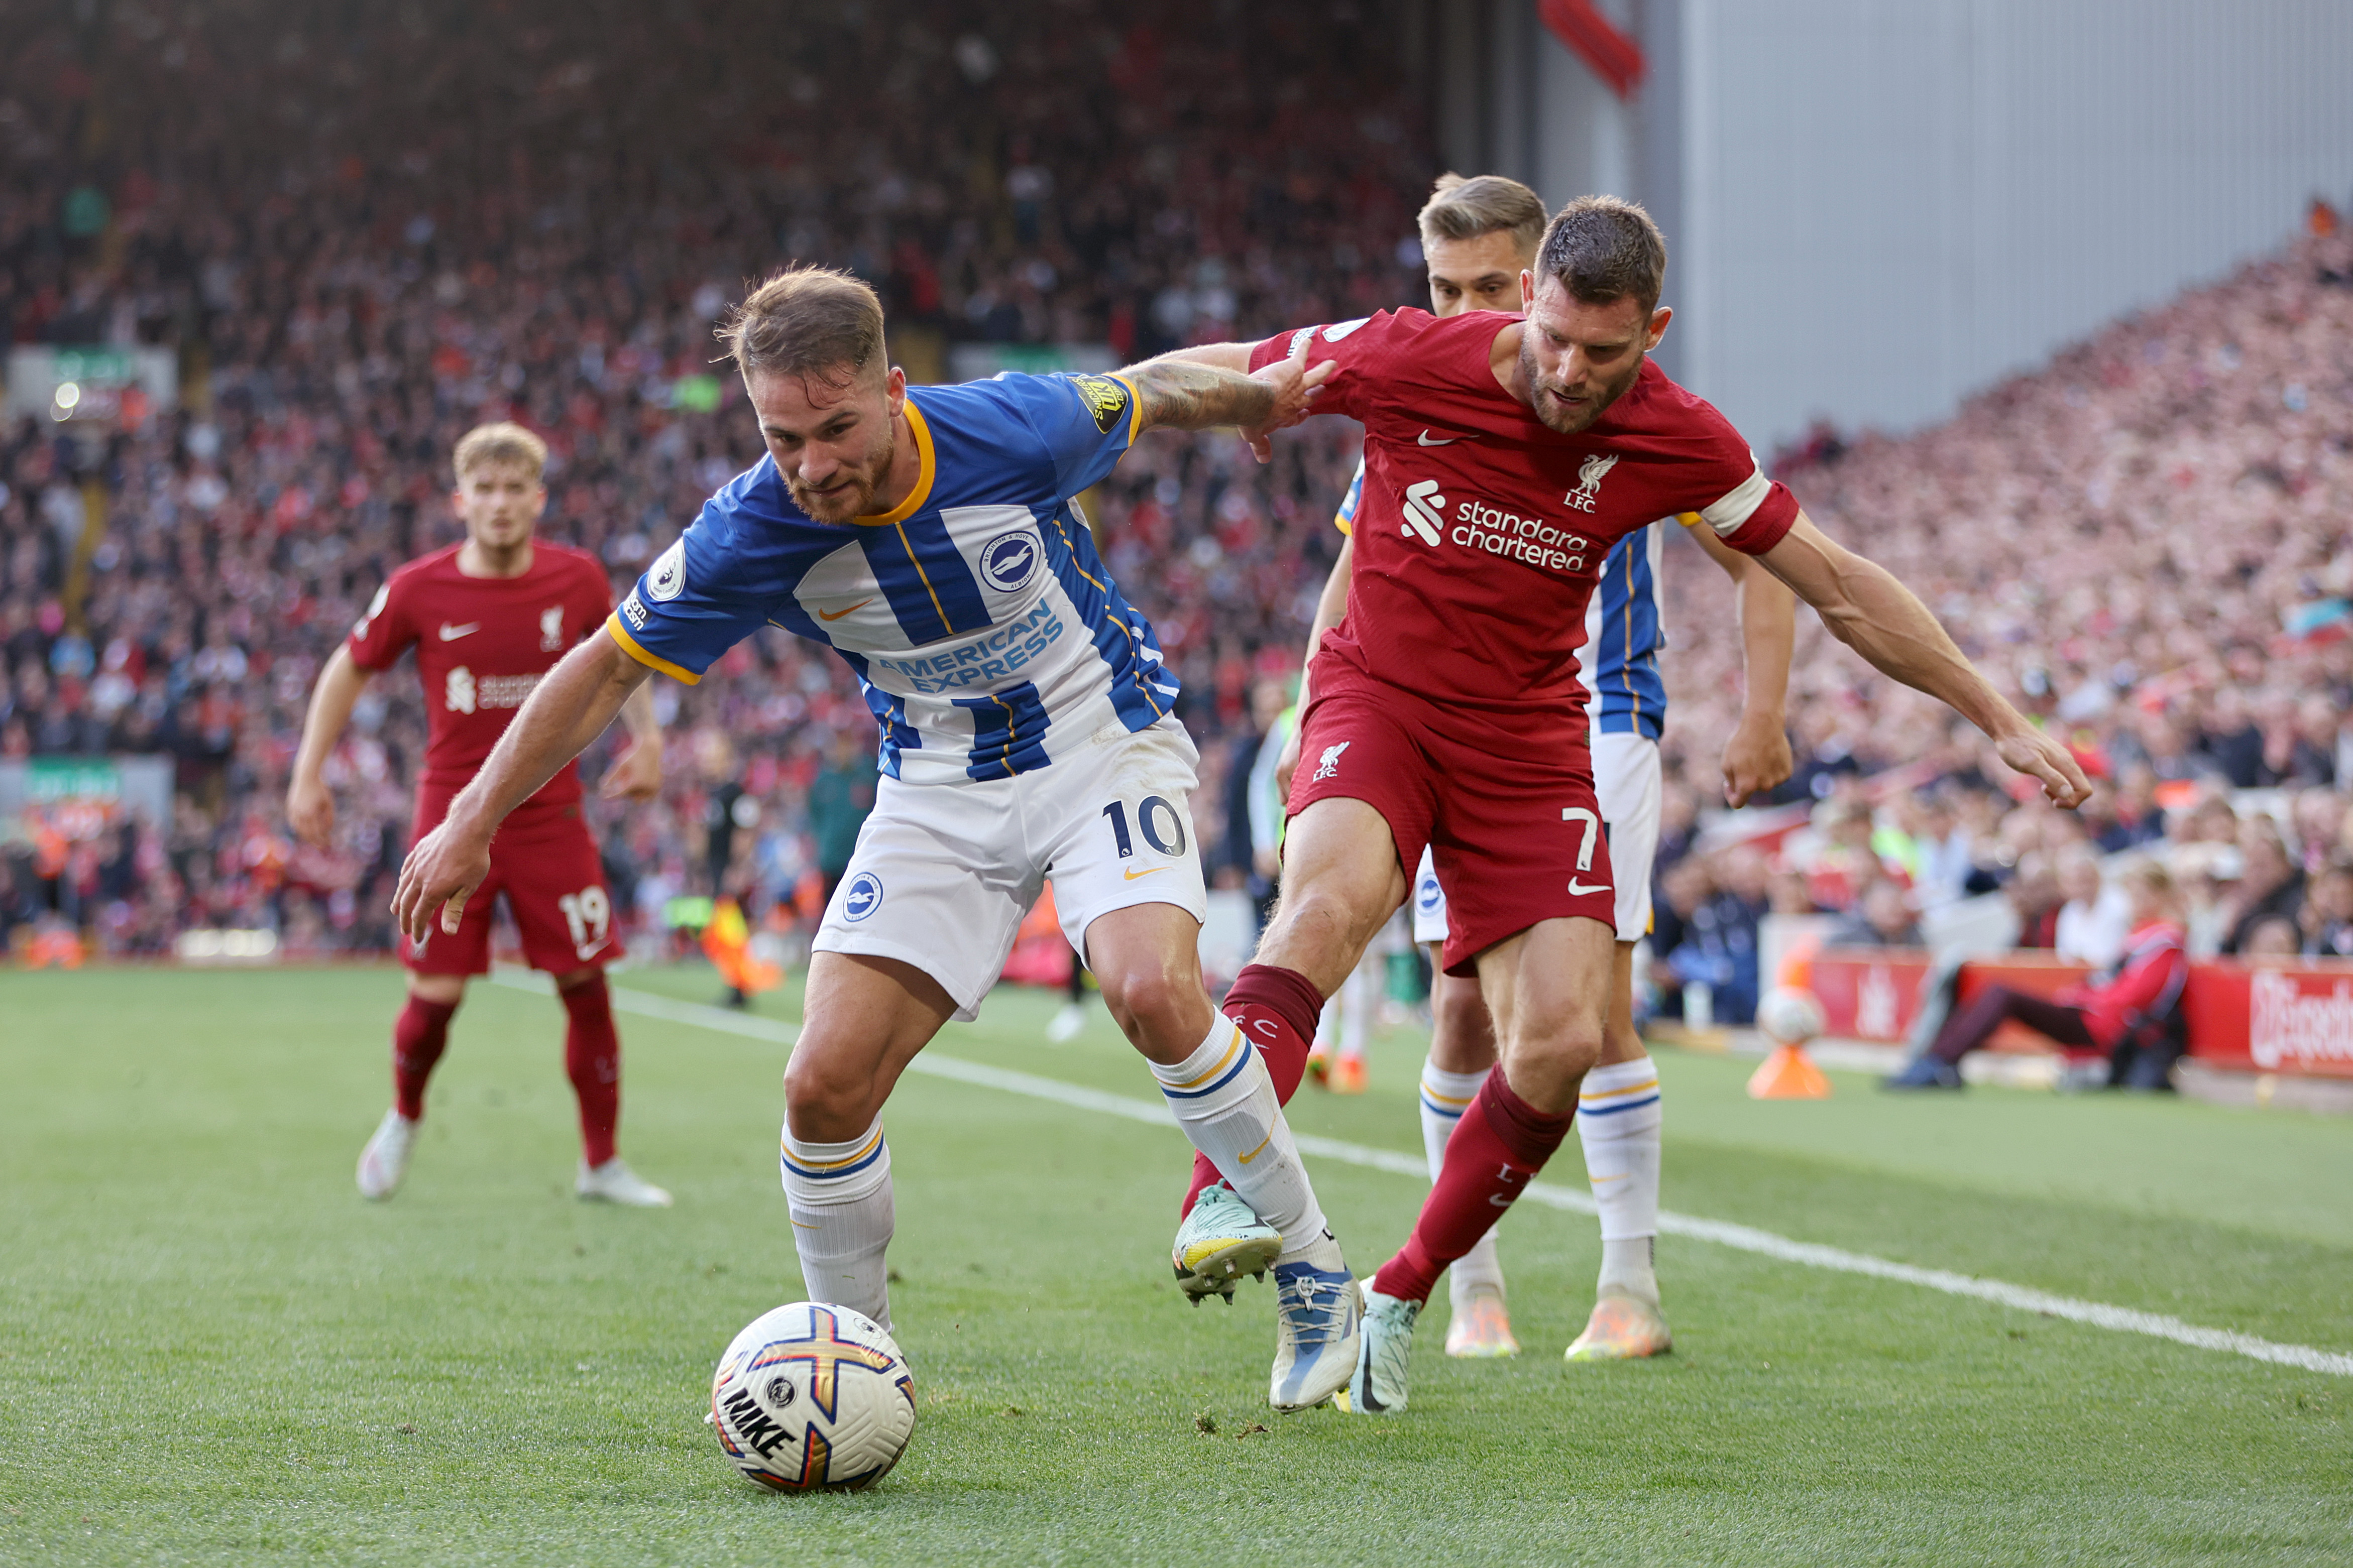 Alexis Mac Allister of Brighton &amp; Hove Albion is challenged by James Milner of Liverpool during the Premier League match between Liverpool FC and Brighton &amp; Hove Albion at Anfield on October 01, 2022 in Liverpool, England.